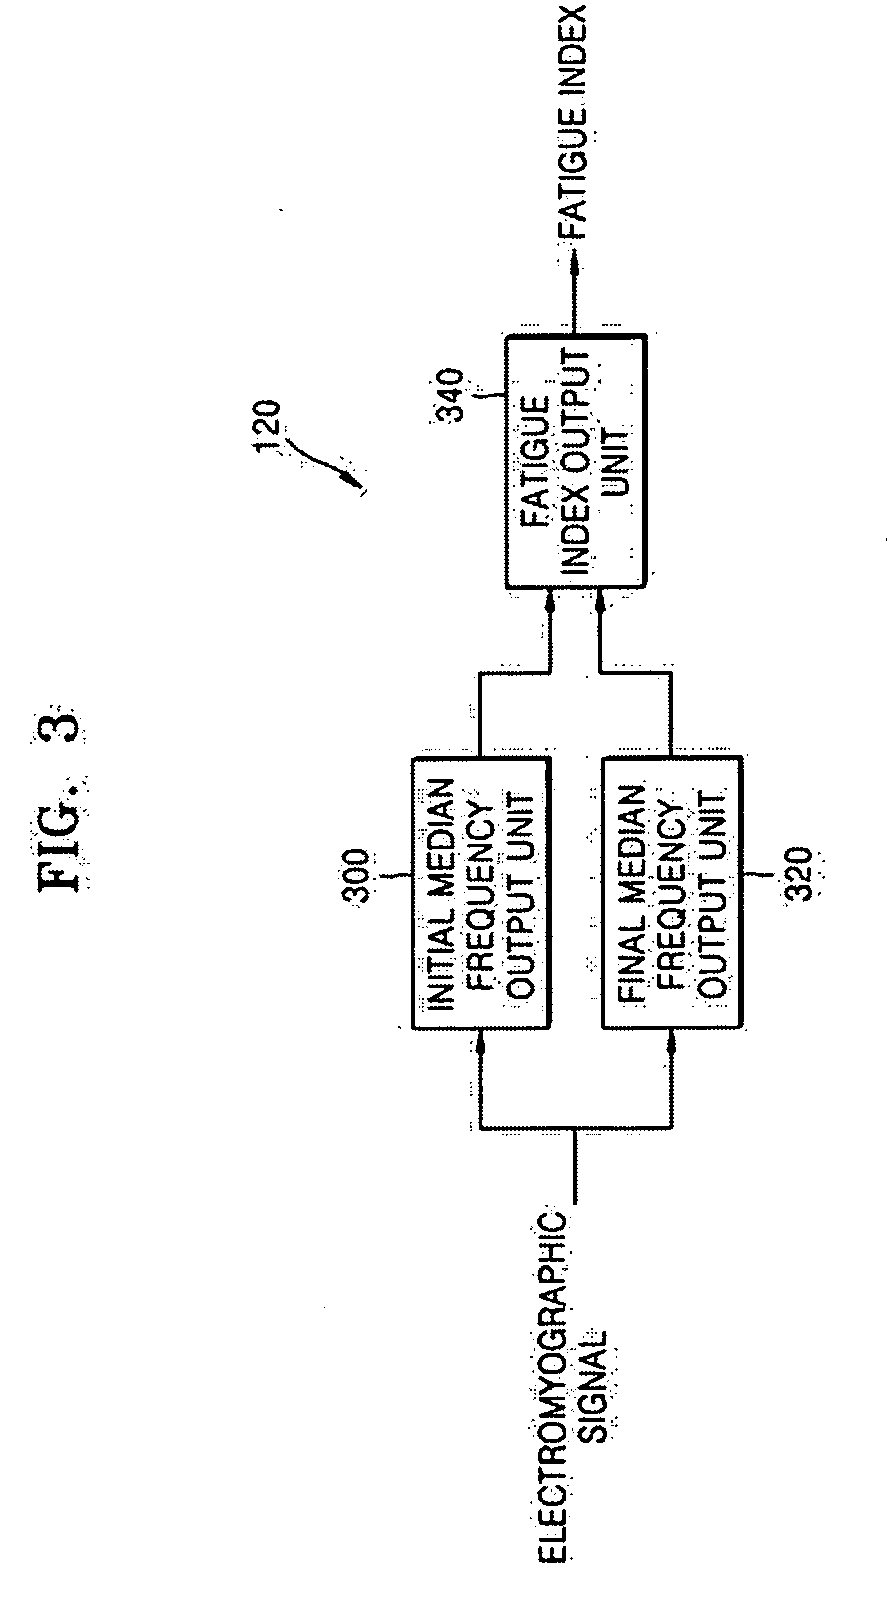 Apparatus, method, and medium controlling electrical stimulation and/or health training/monitoring